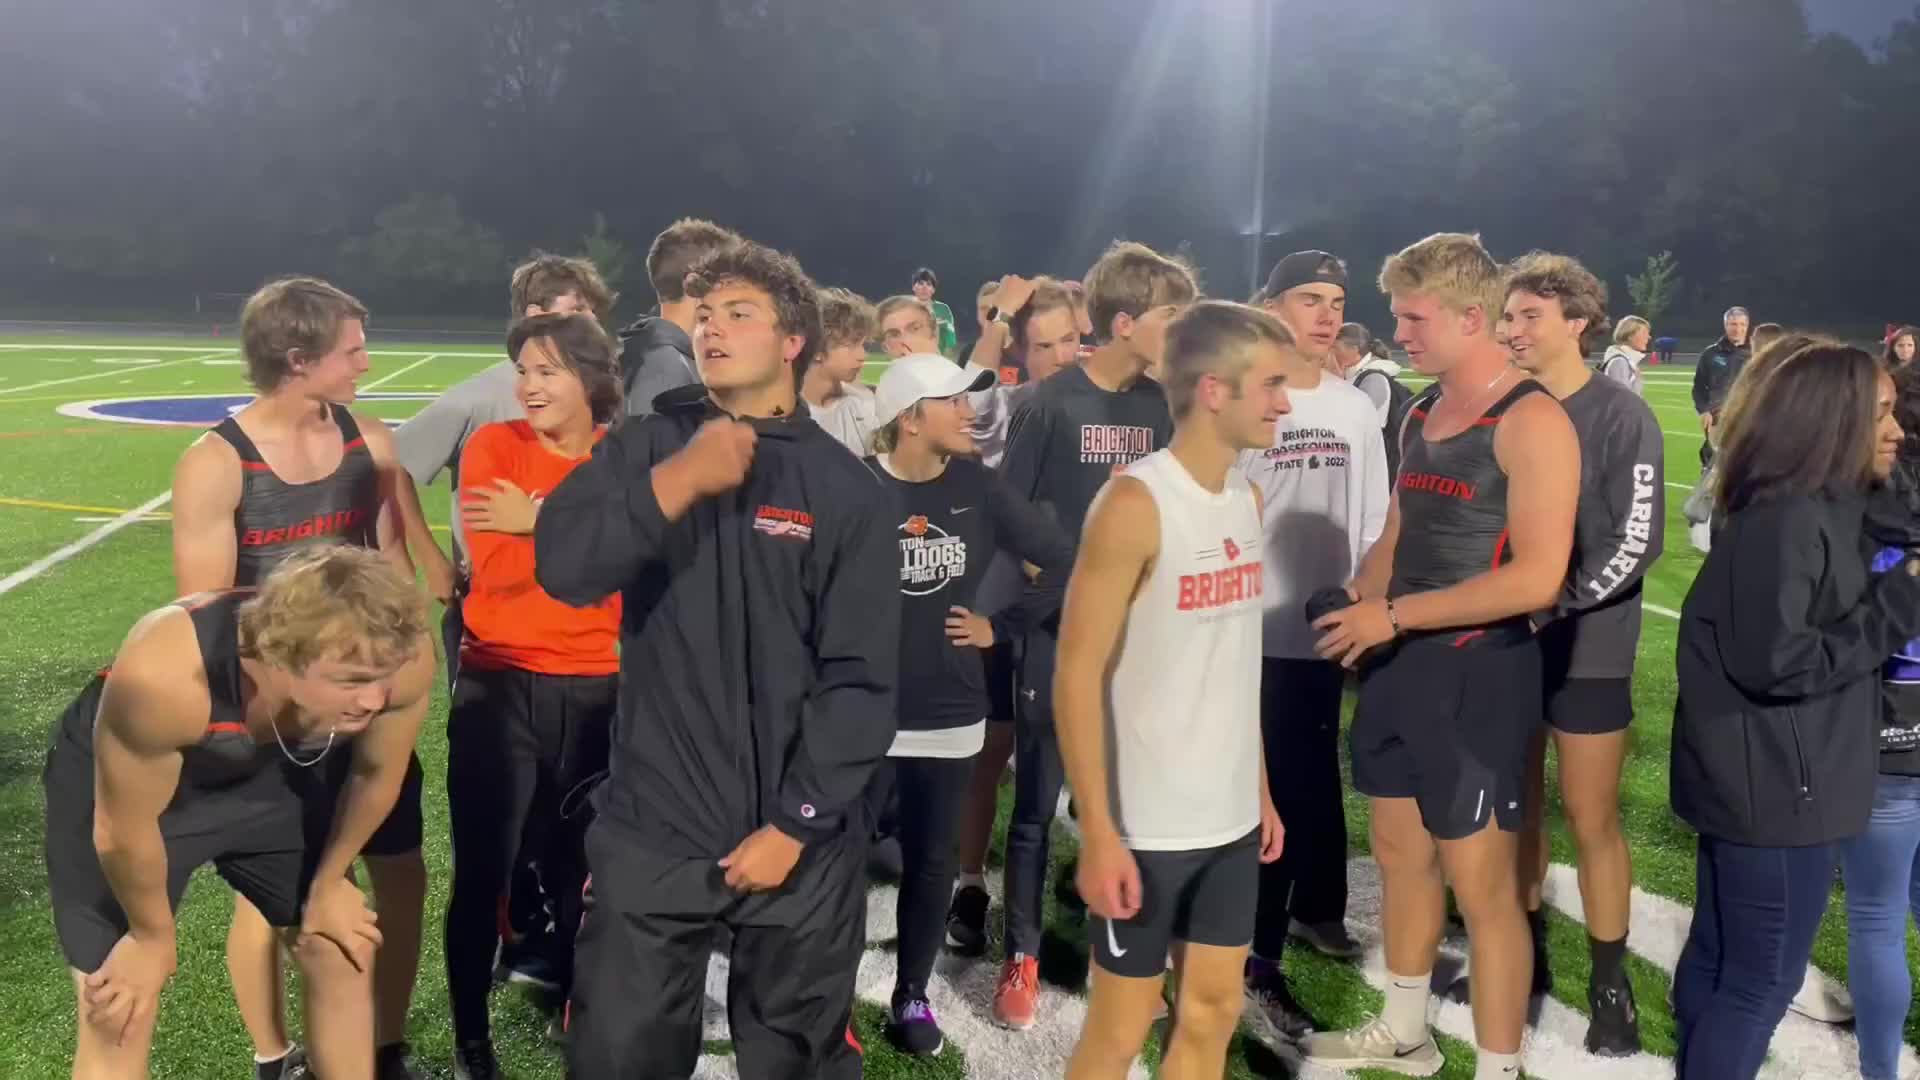 Watch reaction of Brighton boys track and field team after winning regional title